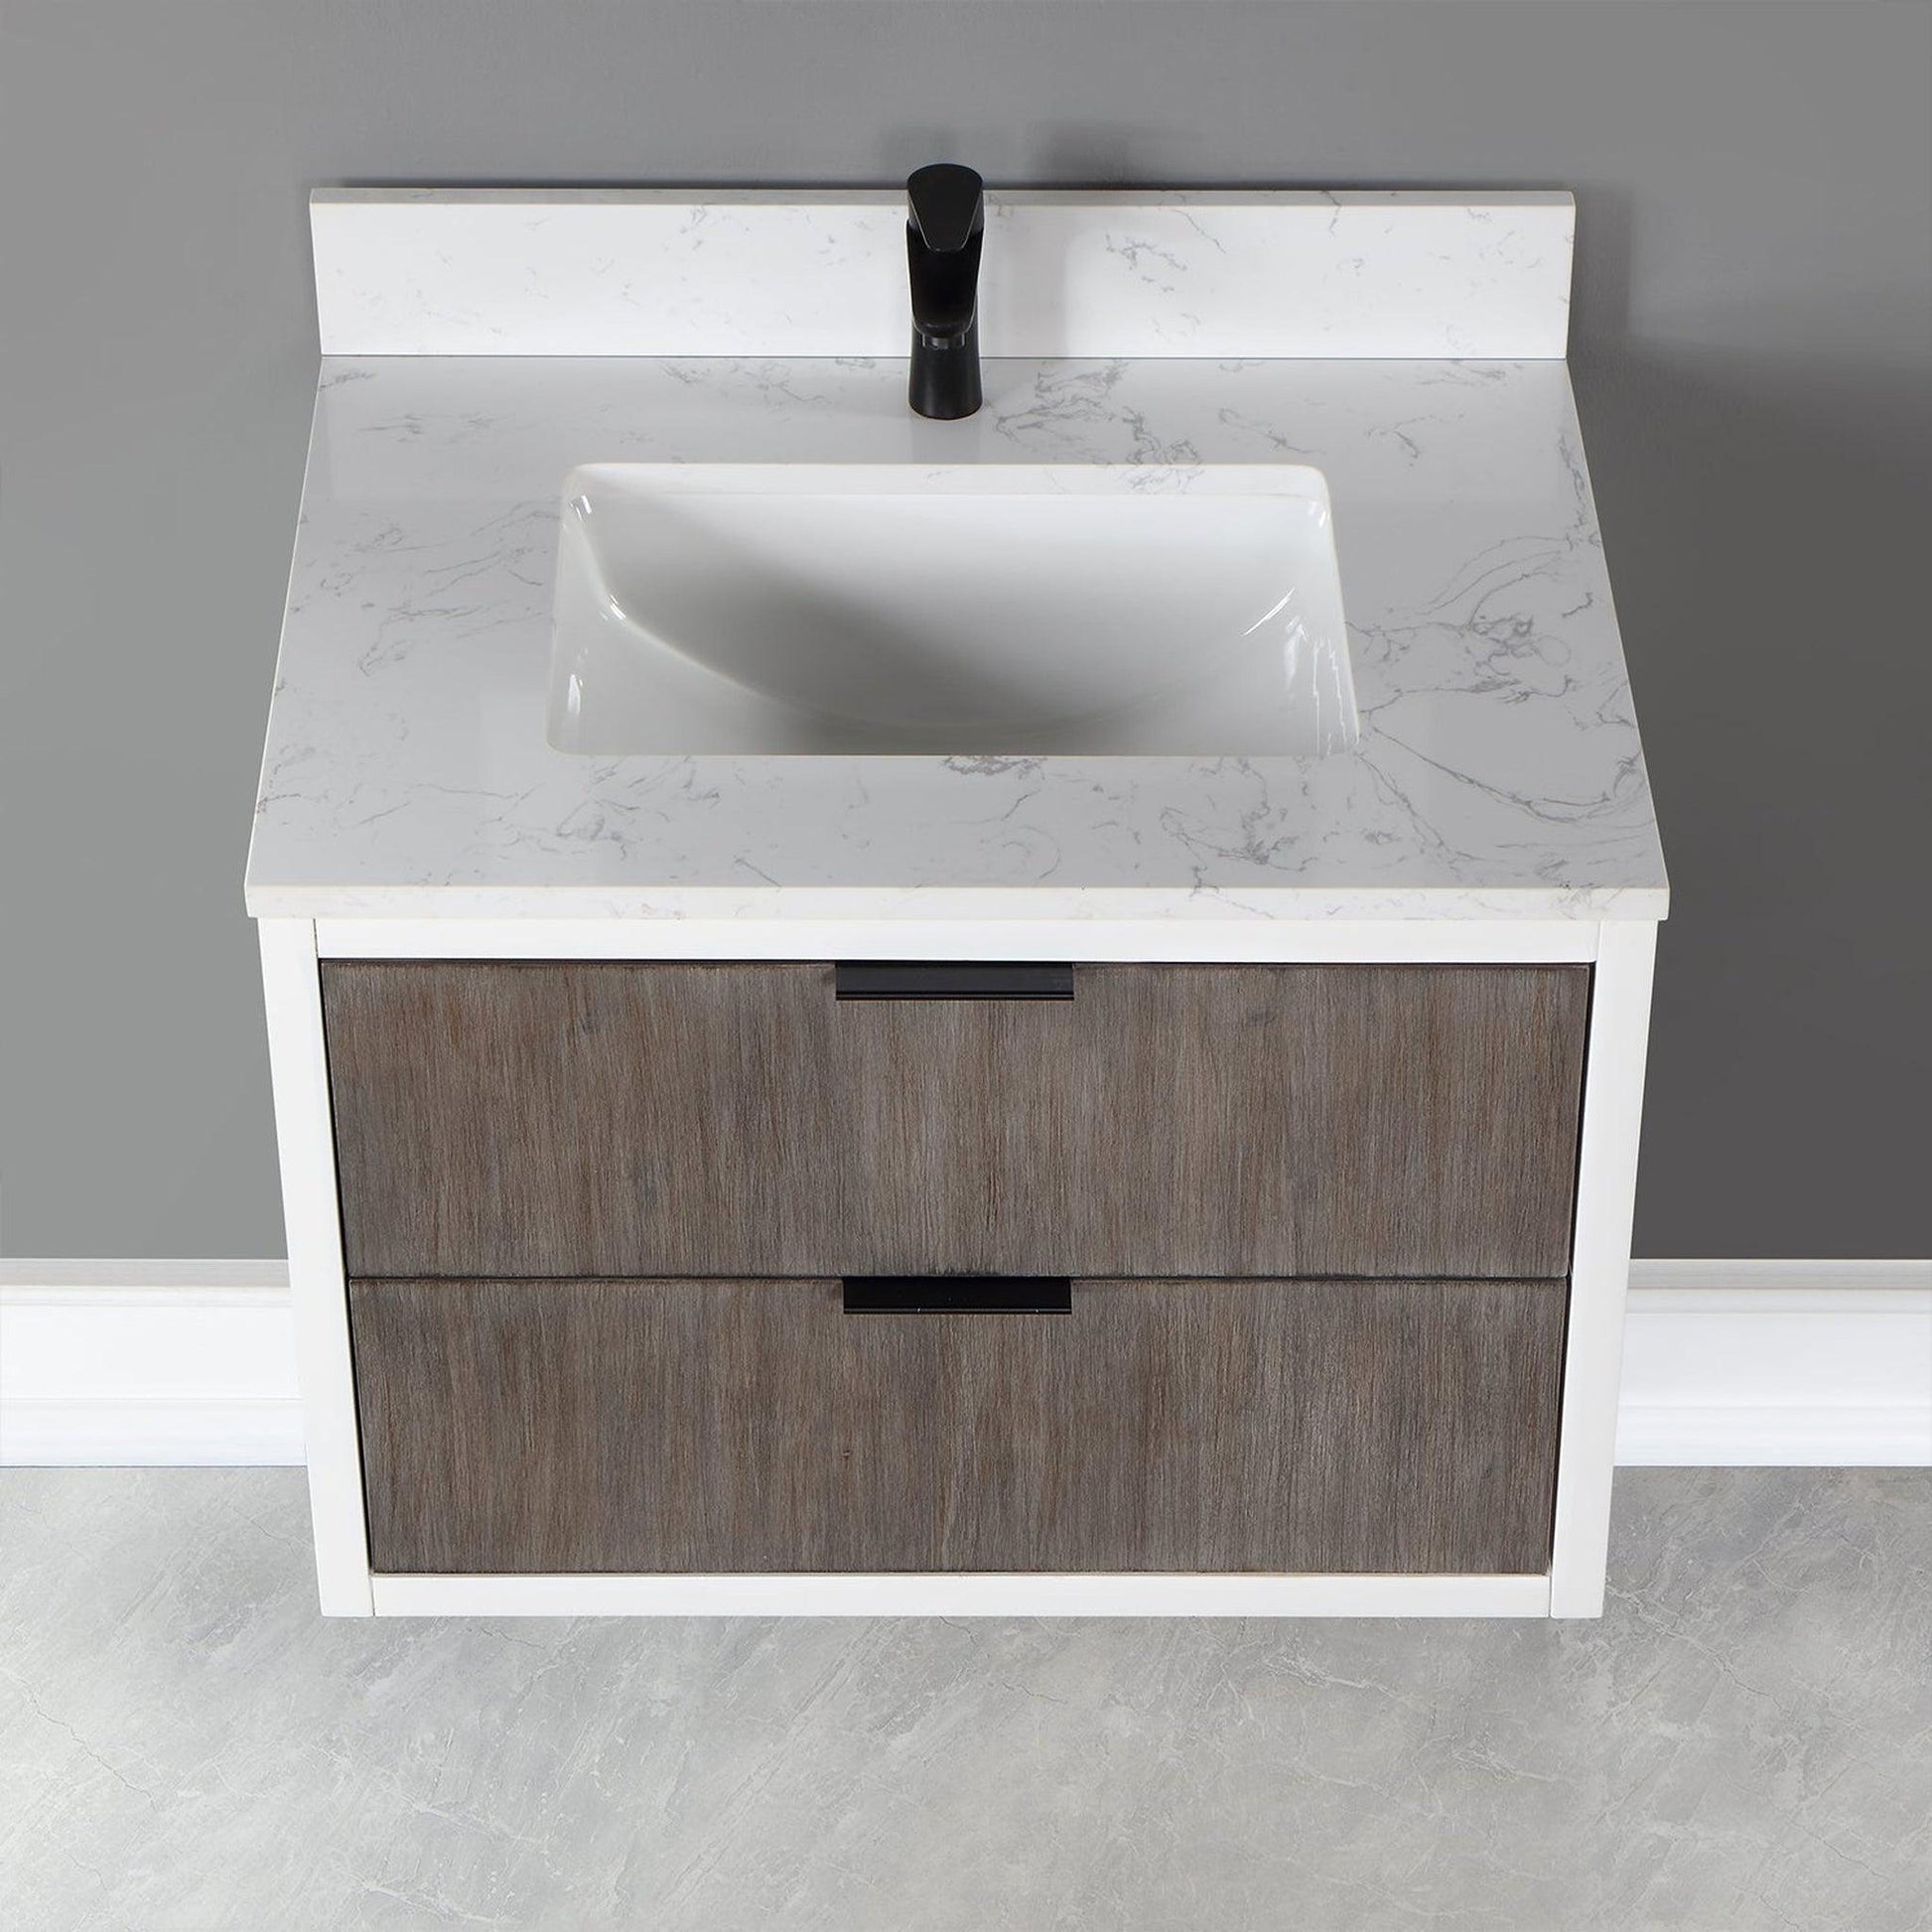 Altair Dione 30" Single Classical Gray Wall-Mounted Bathroom Vanity Set With Mirror, Aosta White Composite Stone Top, Single Rectangular Undermount Ceramic Sink, Overflow, and Backsplash